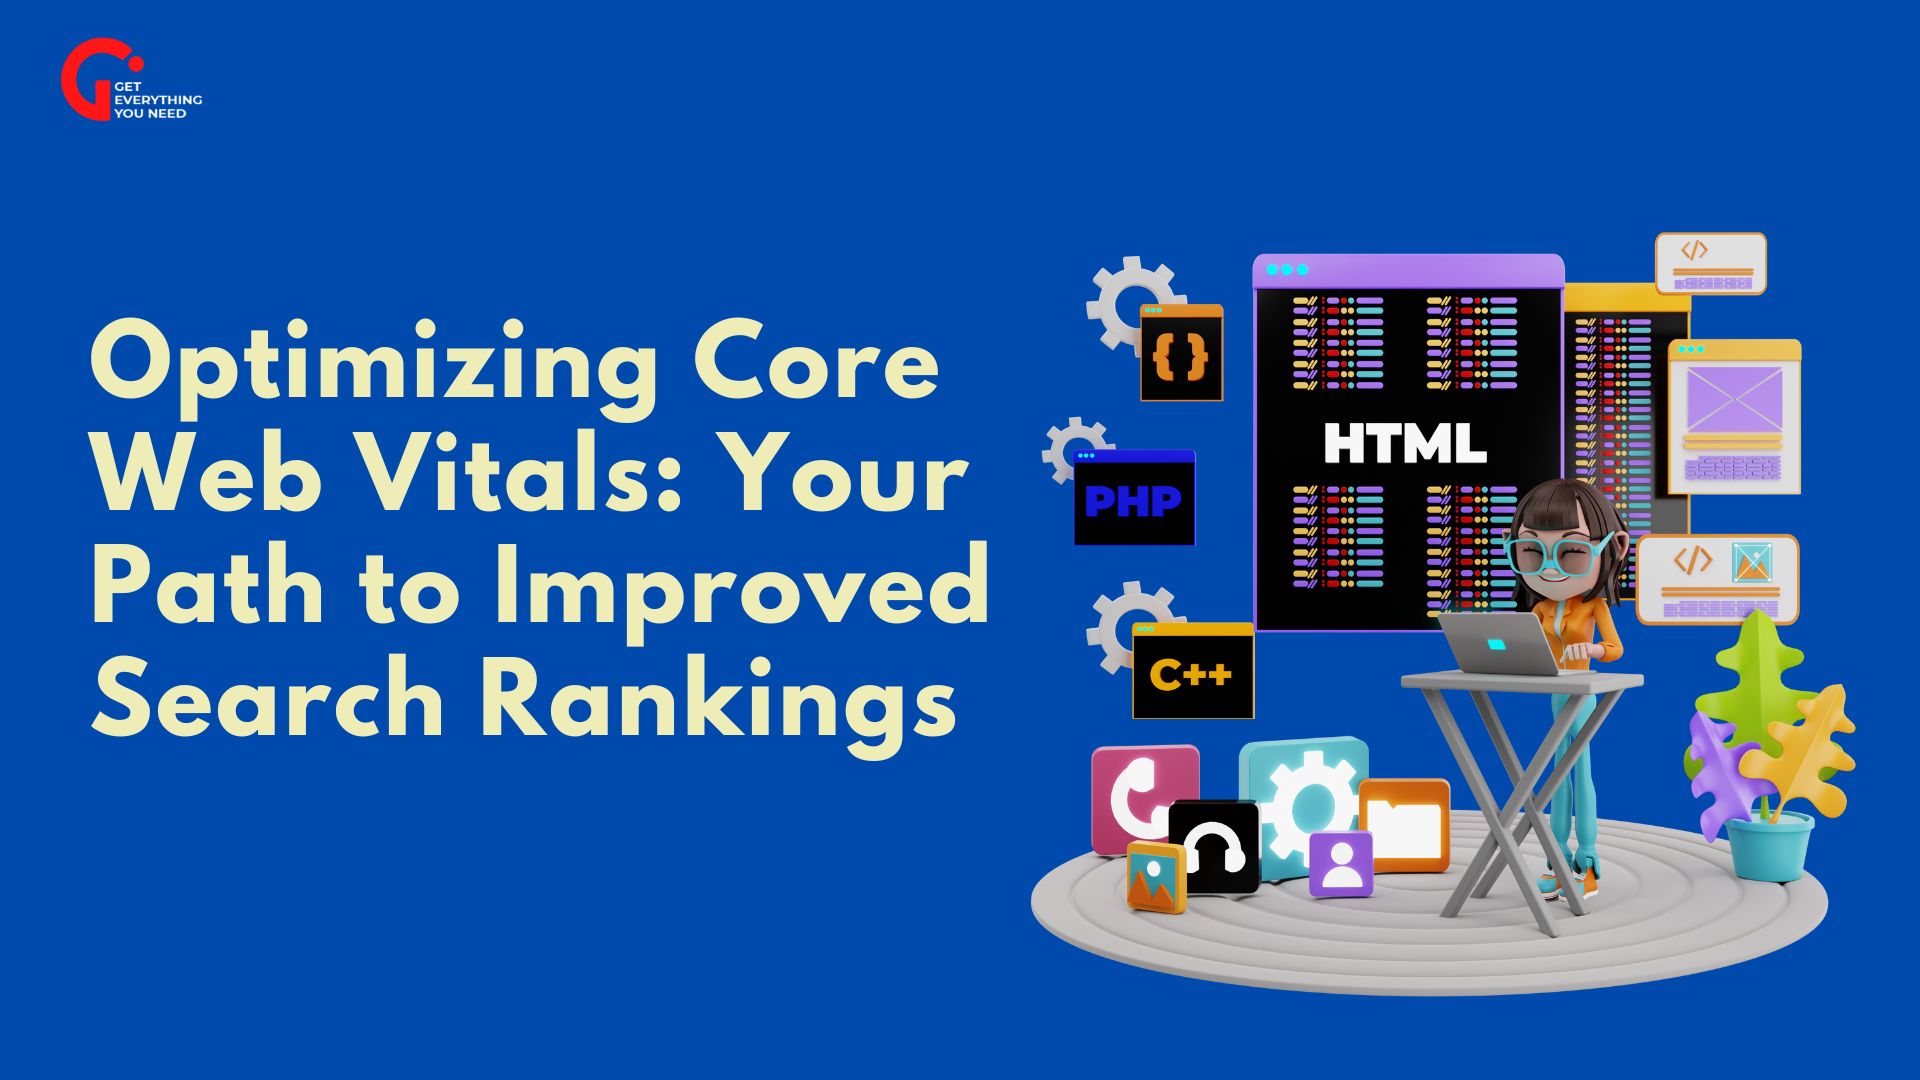 Optimizing Core Web Vitals: Your Path to Improved Search Rankings